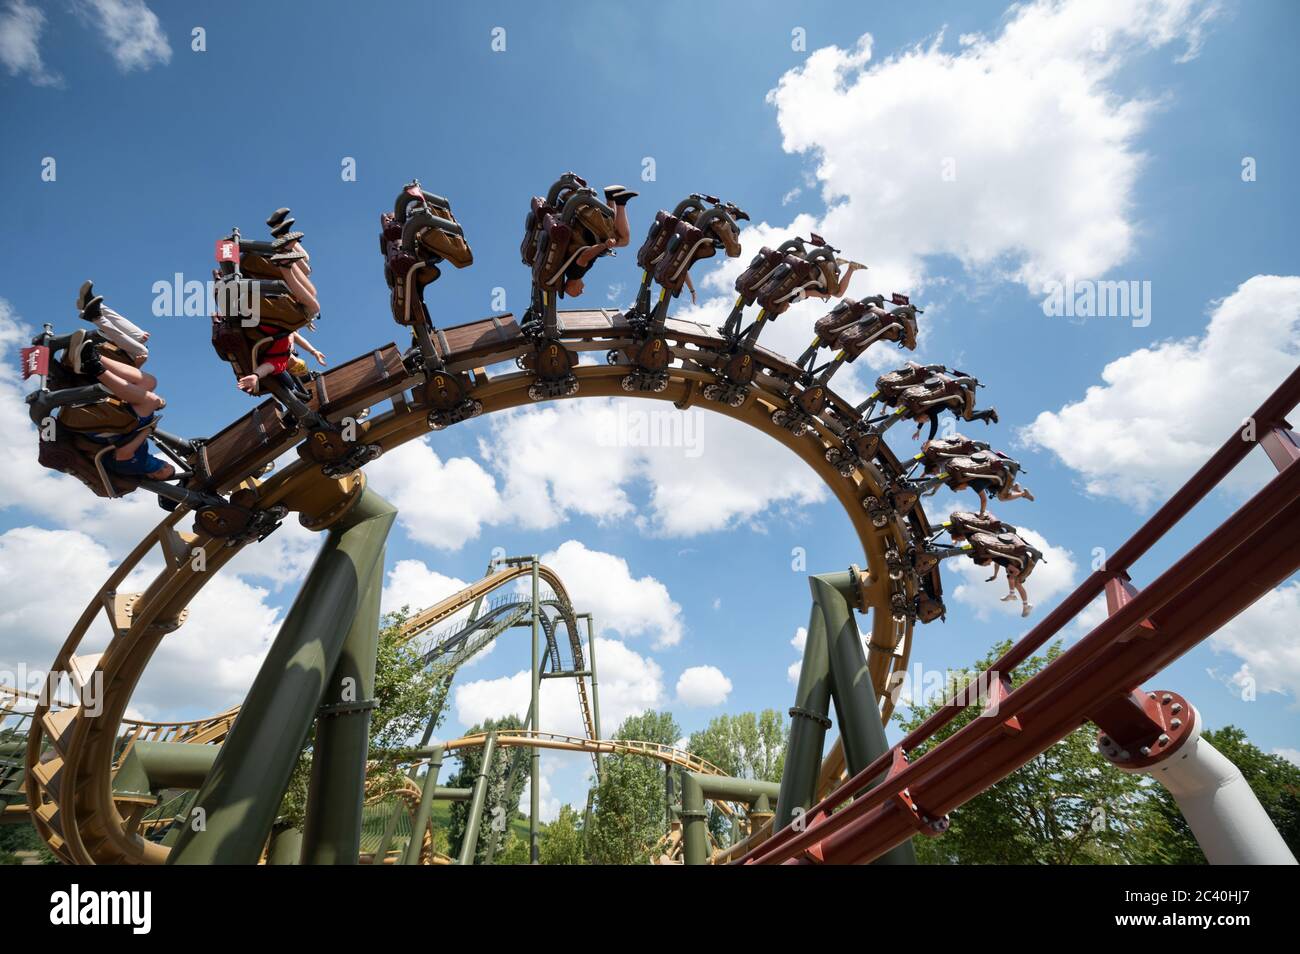 Cleebronn, Germany. 23rd June, 2020. Visitors of the opening event for the  inauguration of two new roller coasters at the Tripsdrill adventure park  ride the roller coaster "neck and neck". For the